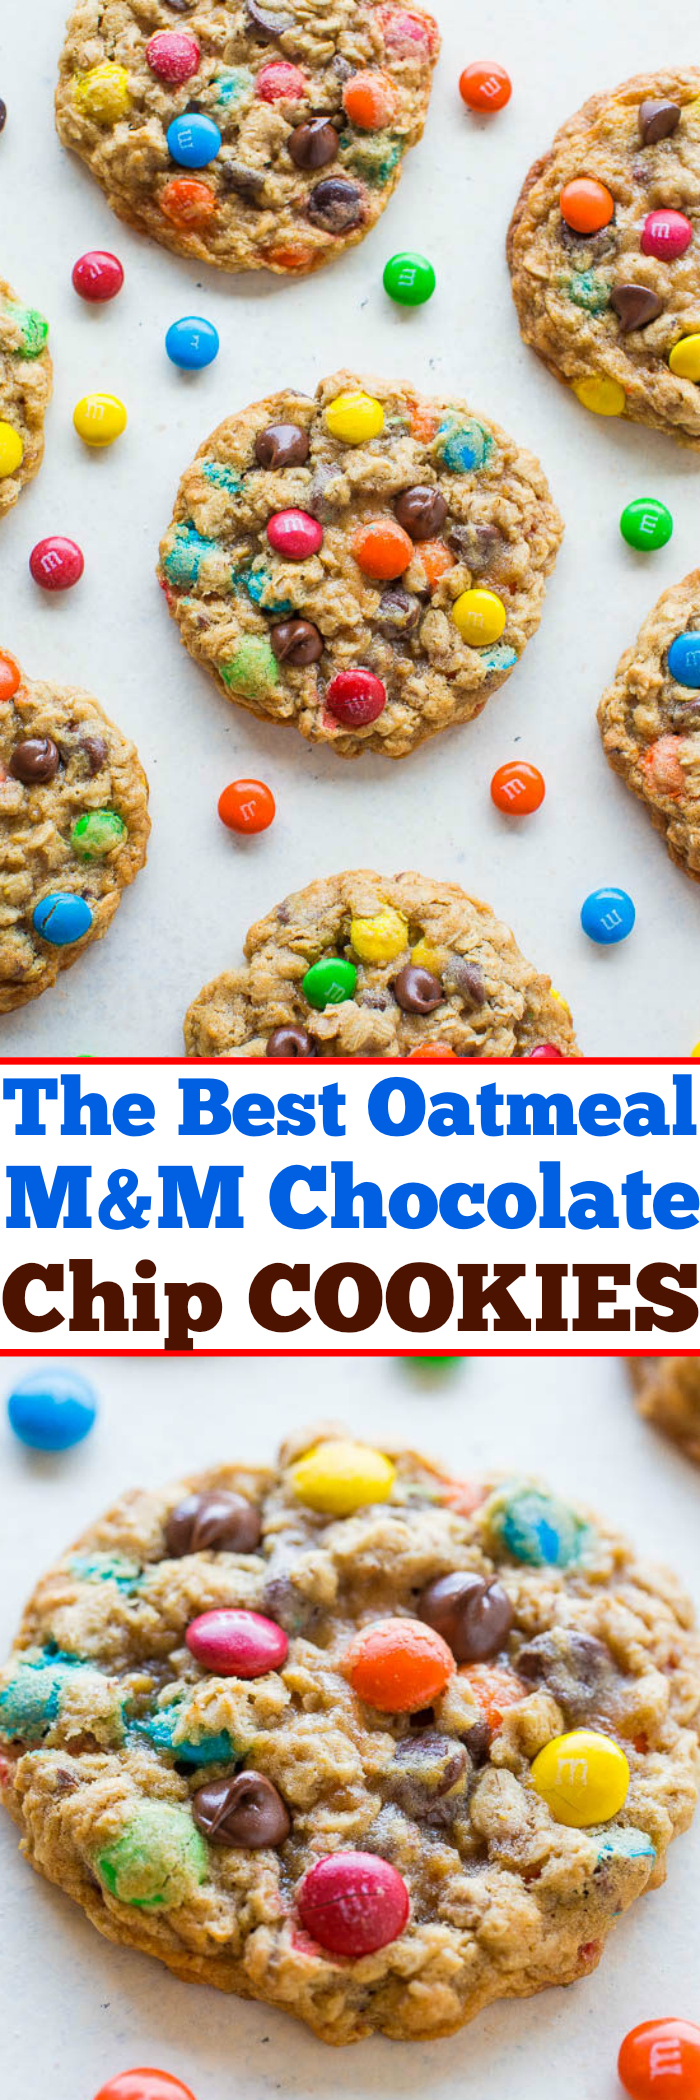 The Best Chocolate Chip Oatmeal M&M's Cookies — Soft, chewy, and LOADED with M&Ms and chocolate chips in every bite!! Make them today! The cookies are SO GOOD they got me a marriage proposal!!